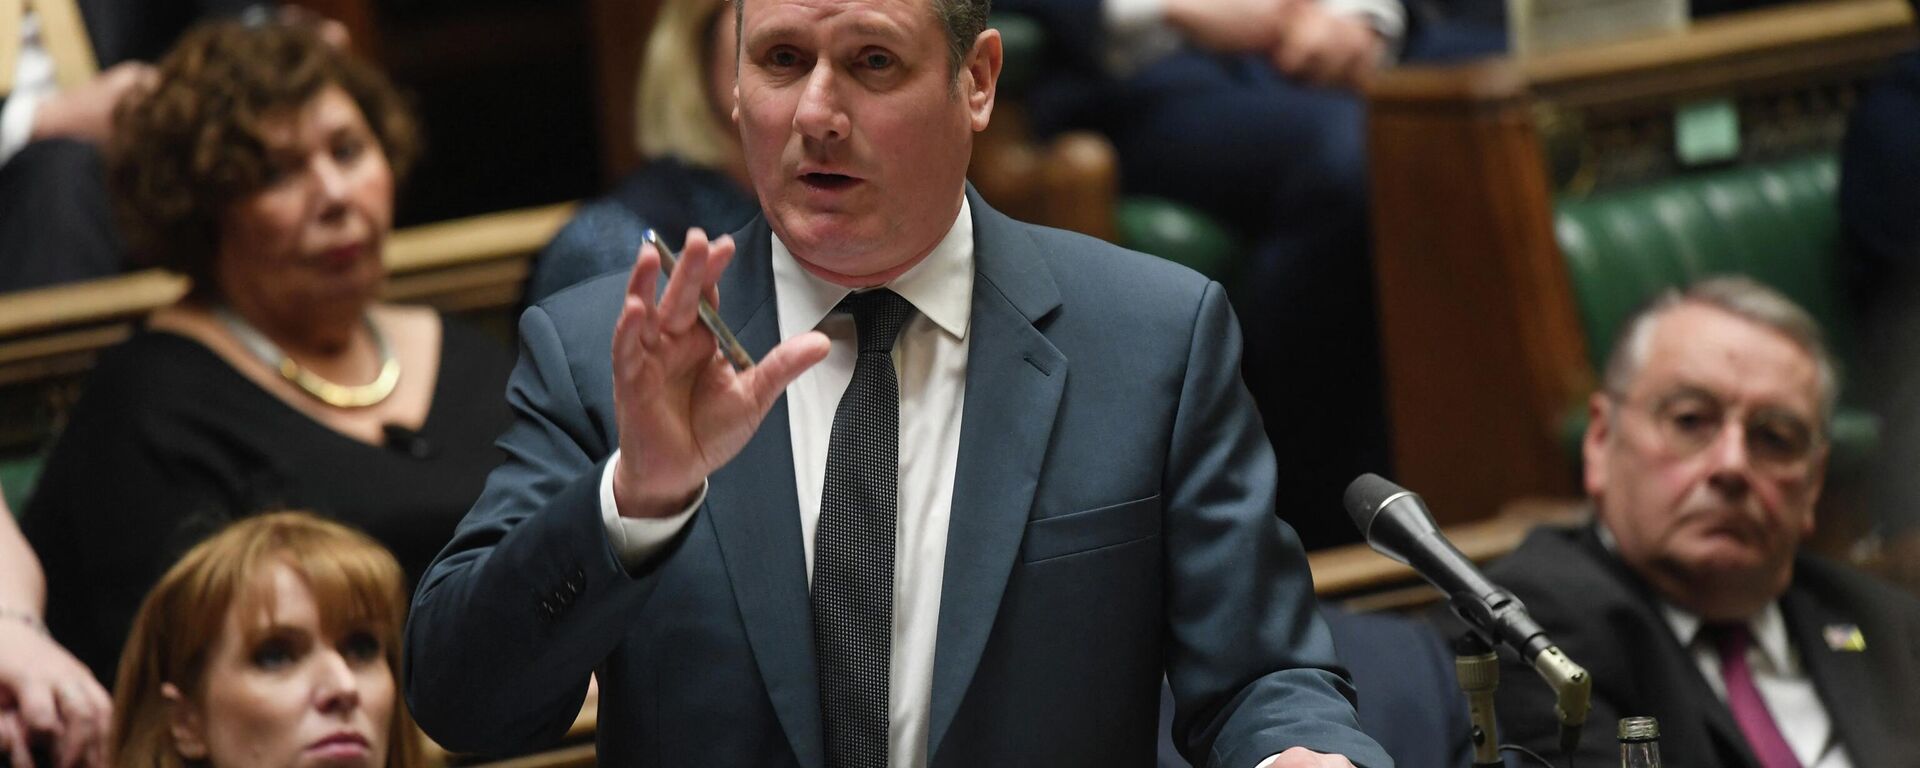 A handout photograph released by the UK Parliament shows Britain's main opposition Labour Party leader Keir Starmer speaking in the House of Commons in London on April 21, 2022, during a debate on whether the prime minister misled the House on lockdown parties - Sputnik International, 1920, 08.05.2022